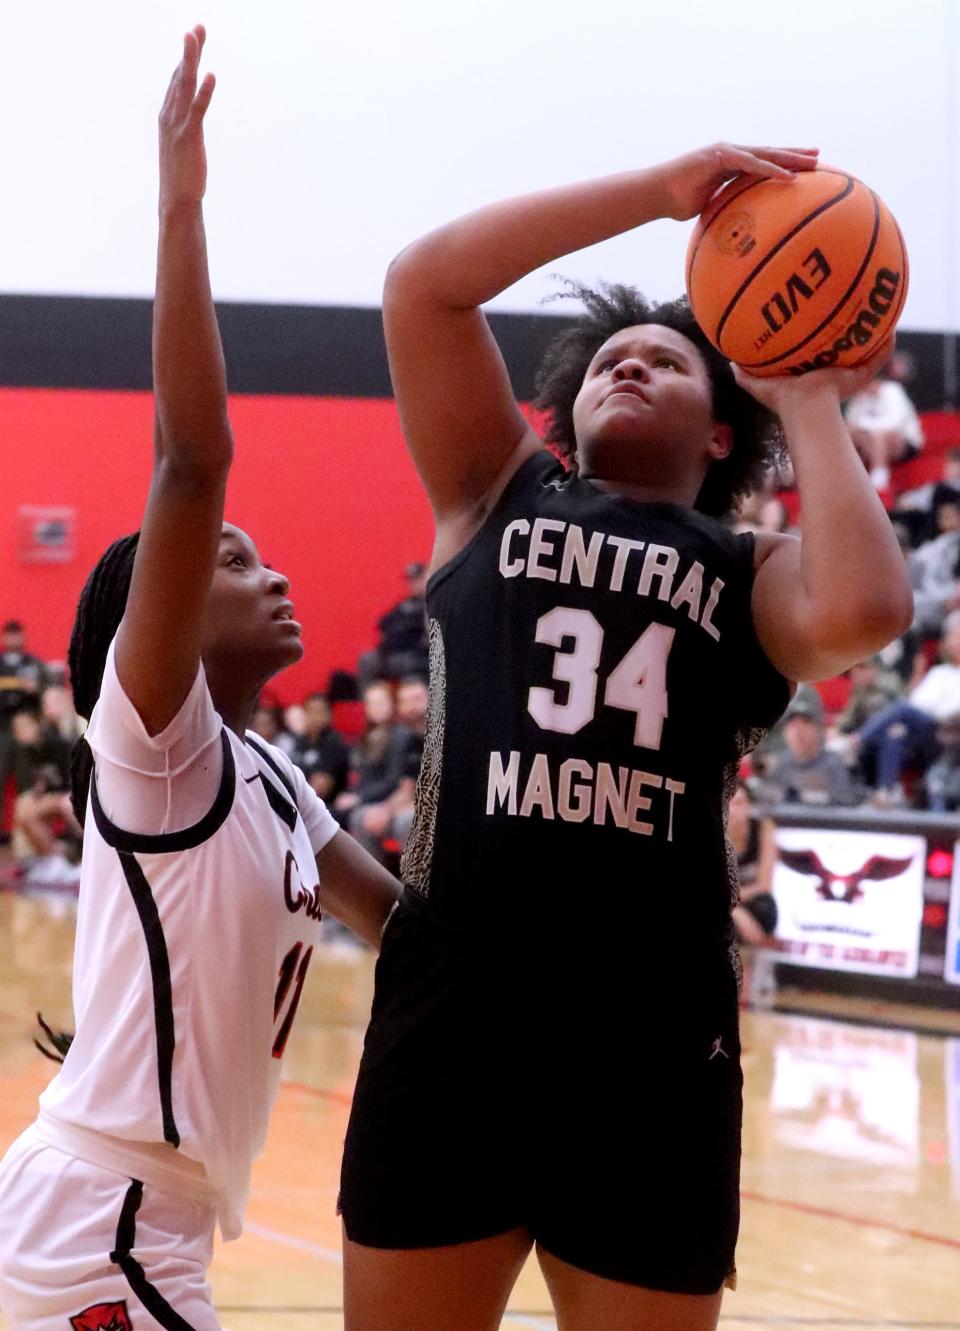 Central Magnet's Madisen Stanley (34) scored 11 points in a win over Summertown Monday.